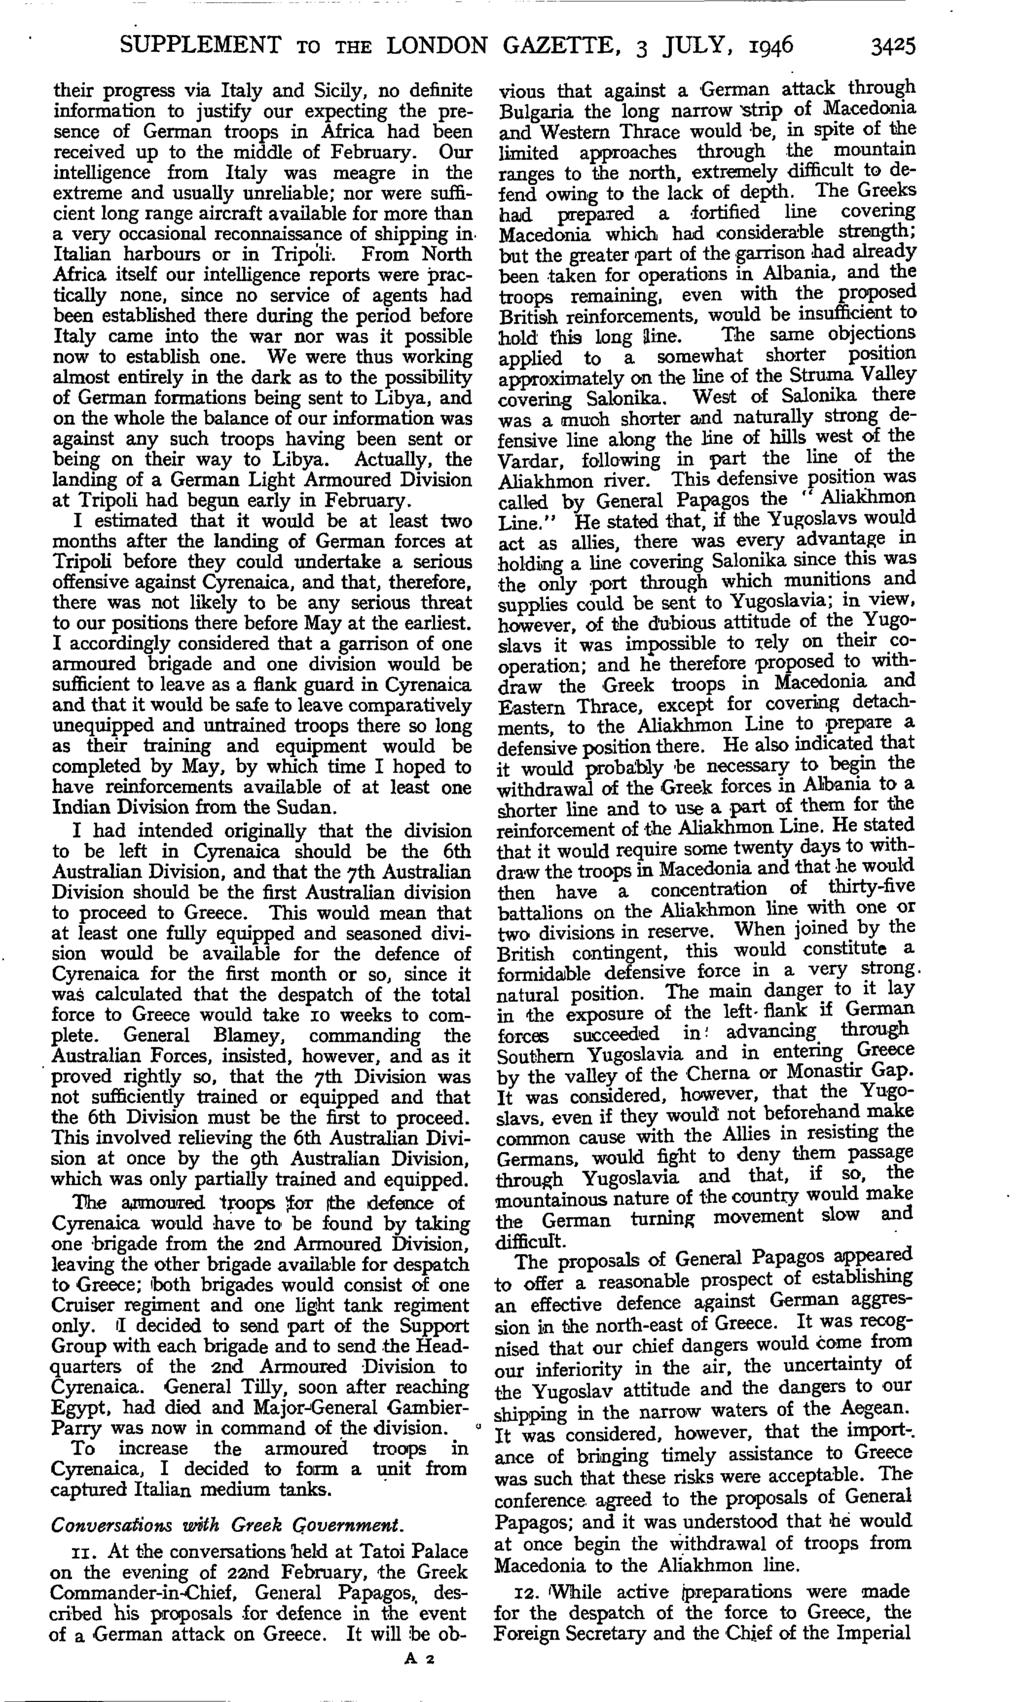 SUPPLEMENT TO THE LONDON GAZETTE, 3 JULY, 1946 3425 their progress via Italy and Sicily, no definite information to justify our expecting the presence of German troops in Africa had been received up